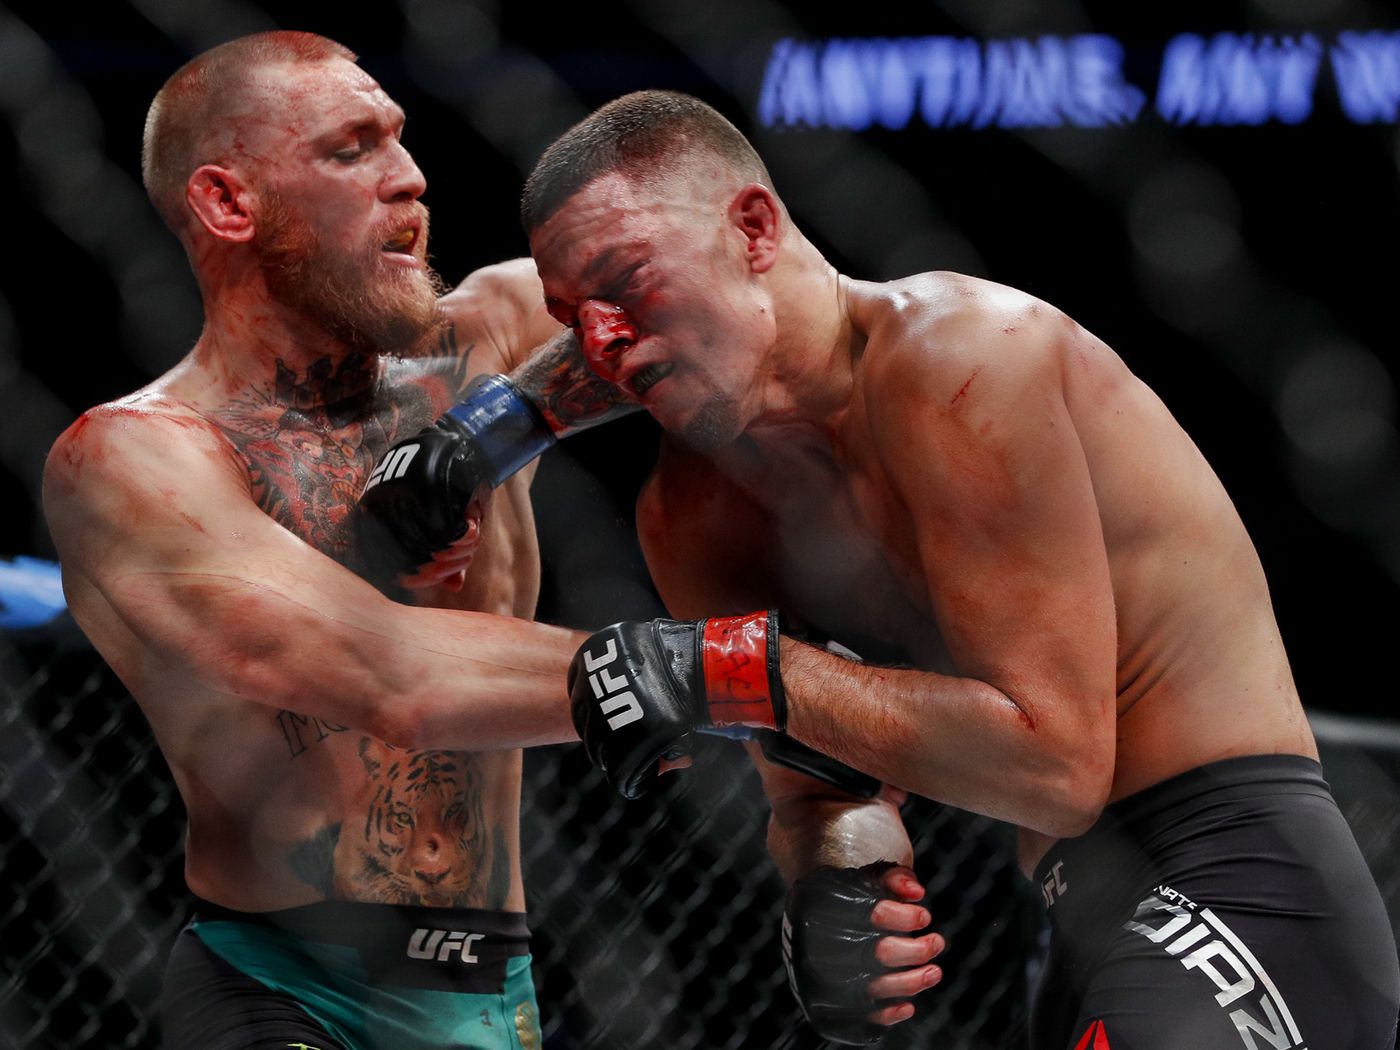 Conor McGregor throwing an elbow at Nate Diaz